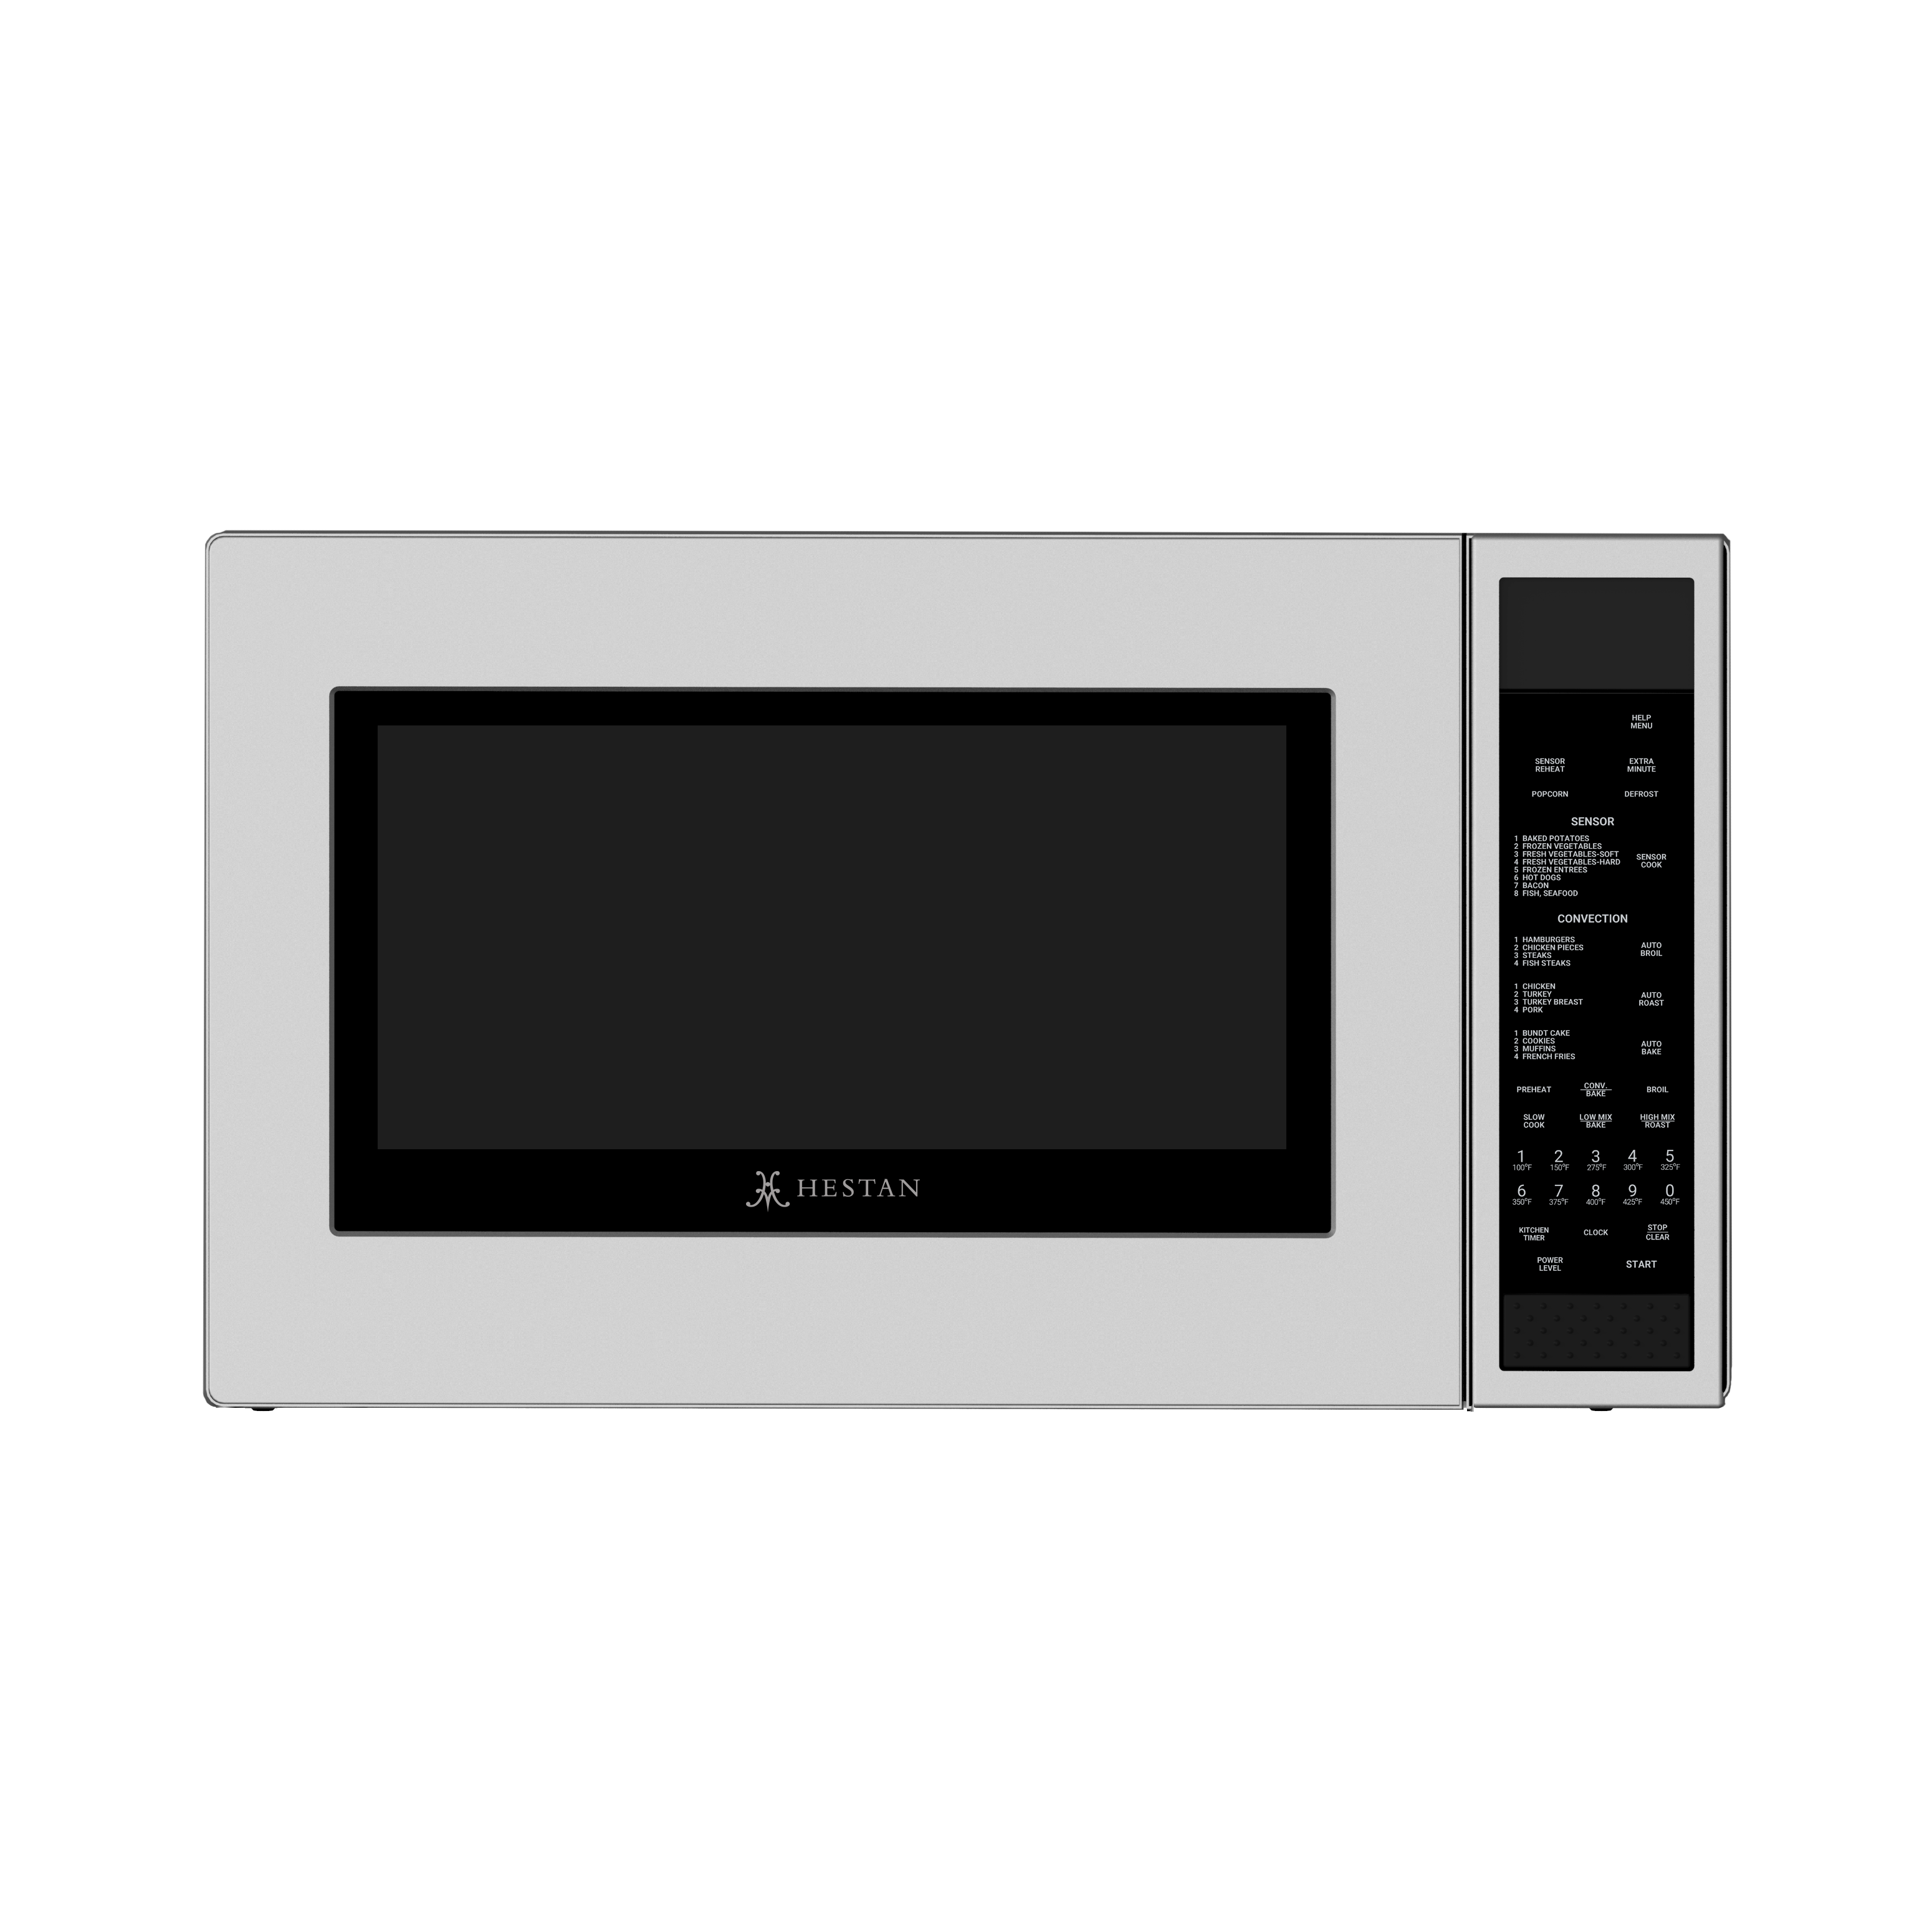 24" Convection Microwave